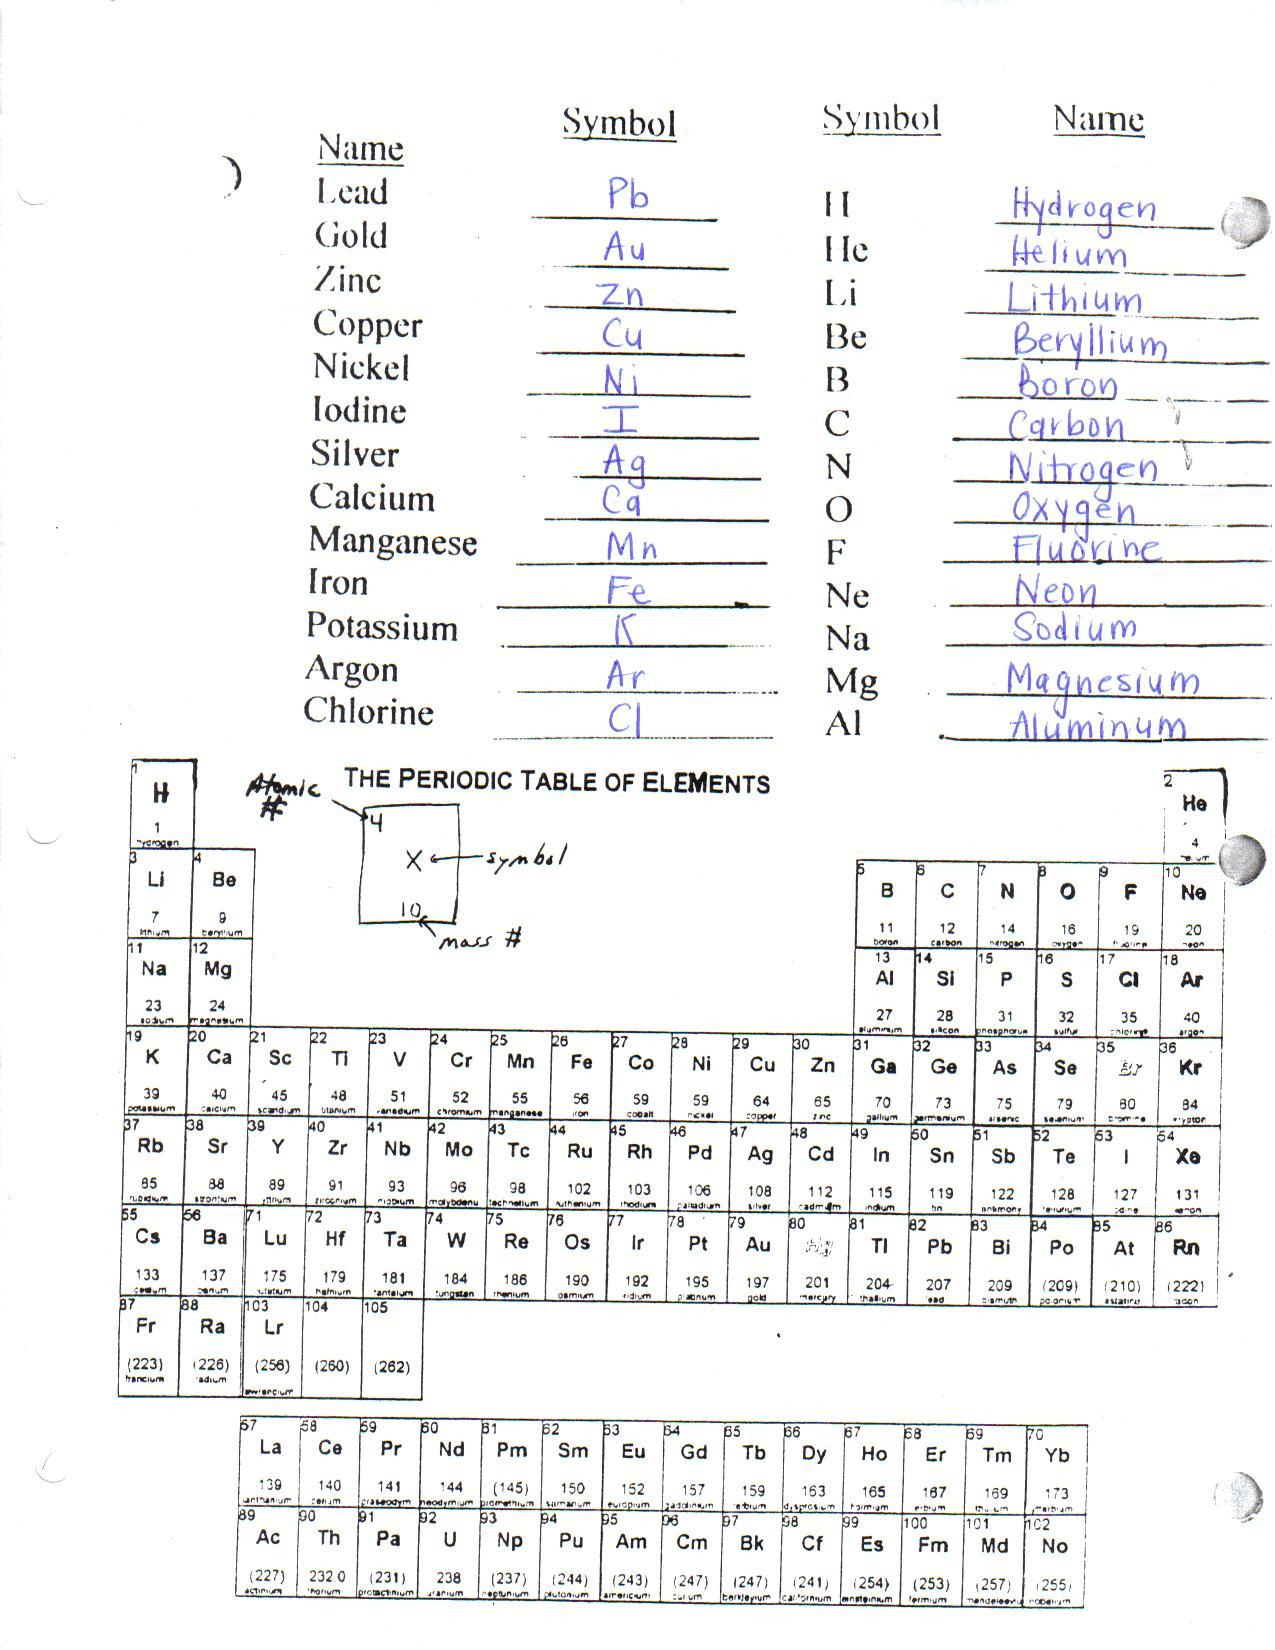 Elements Compounds Amp Mixtures Worksheet Counting atoms Worksheet Google Search